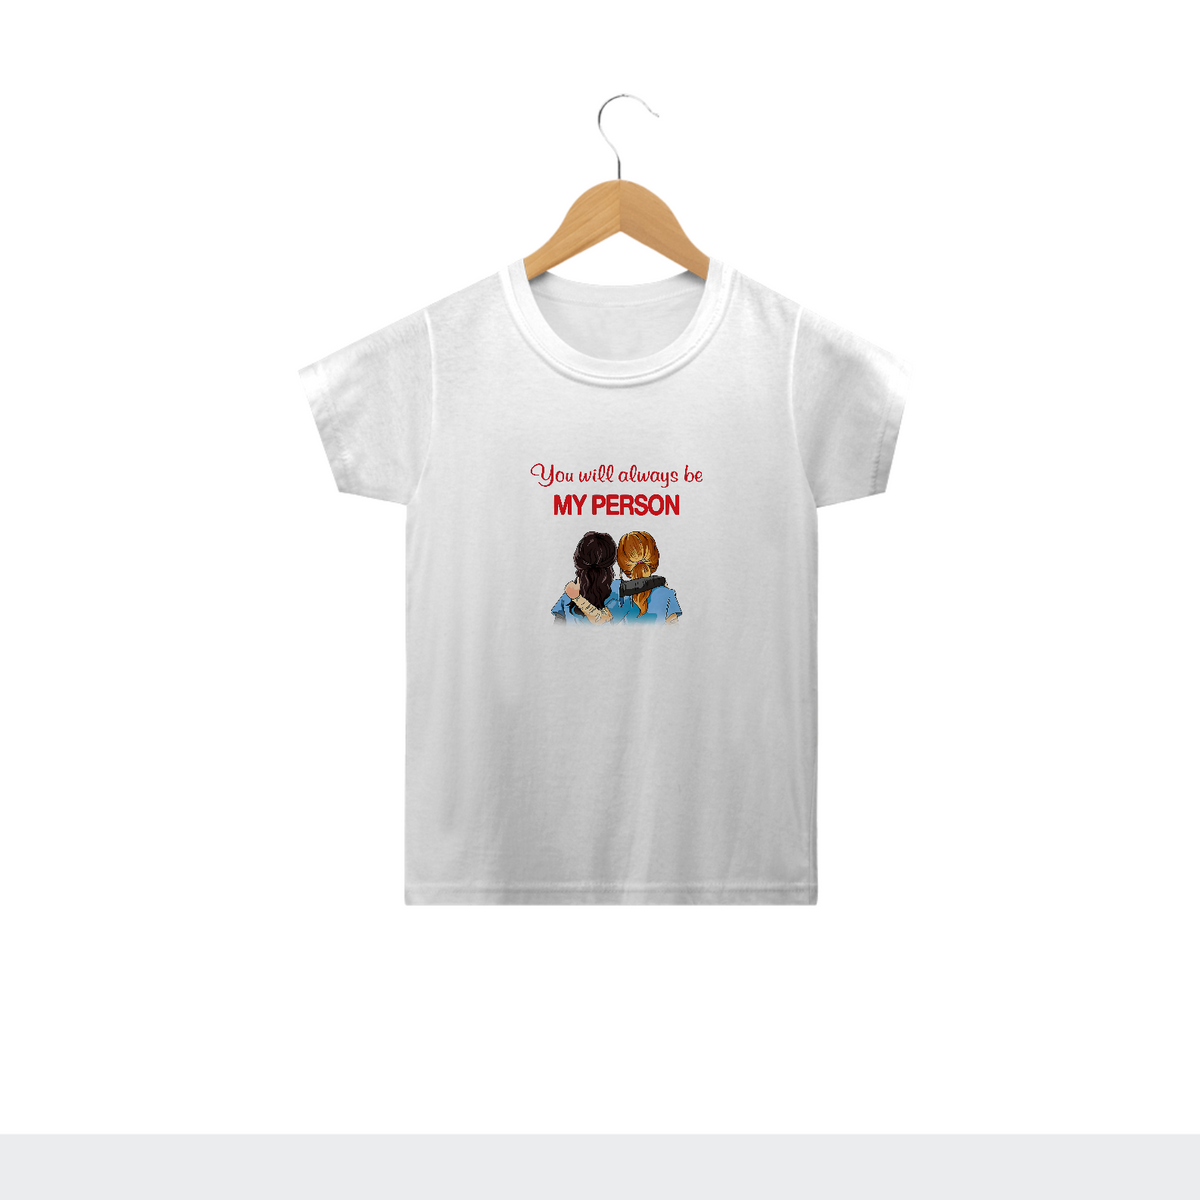 Nome do produto: You Will Always Be My Person | T-shirt infantil